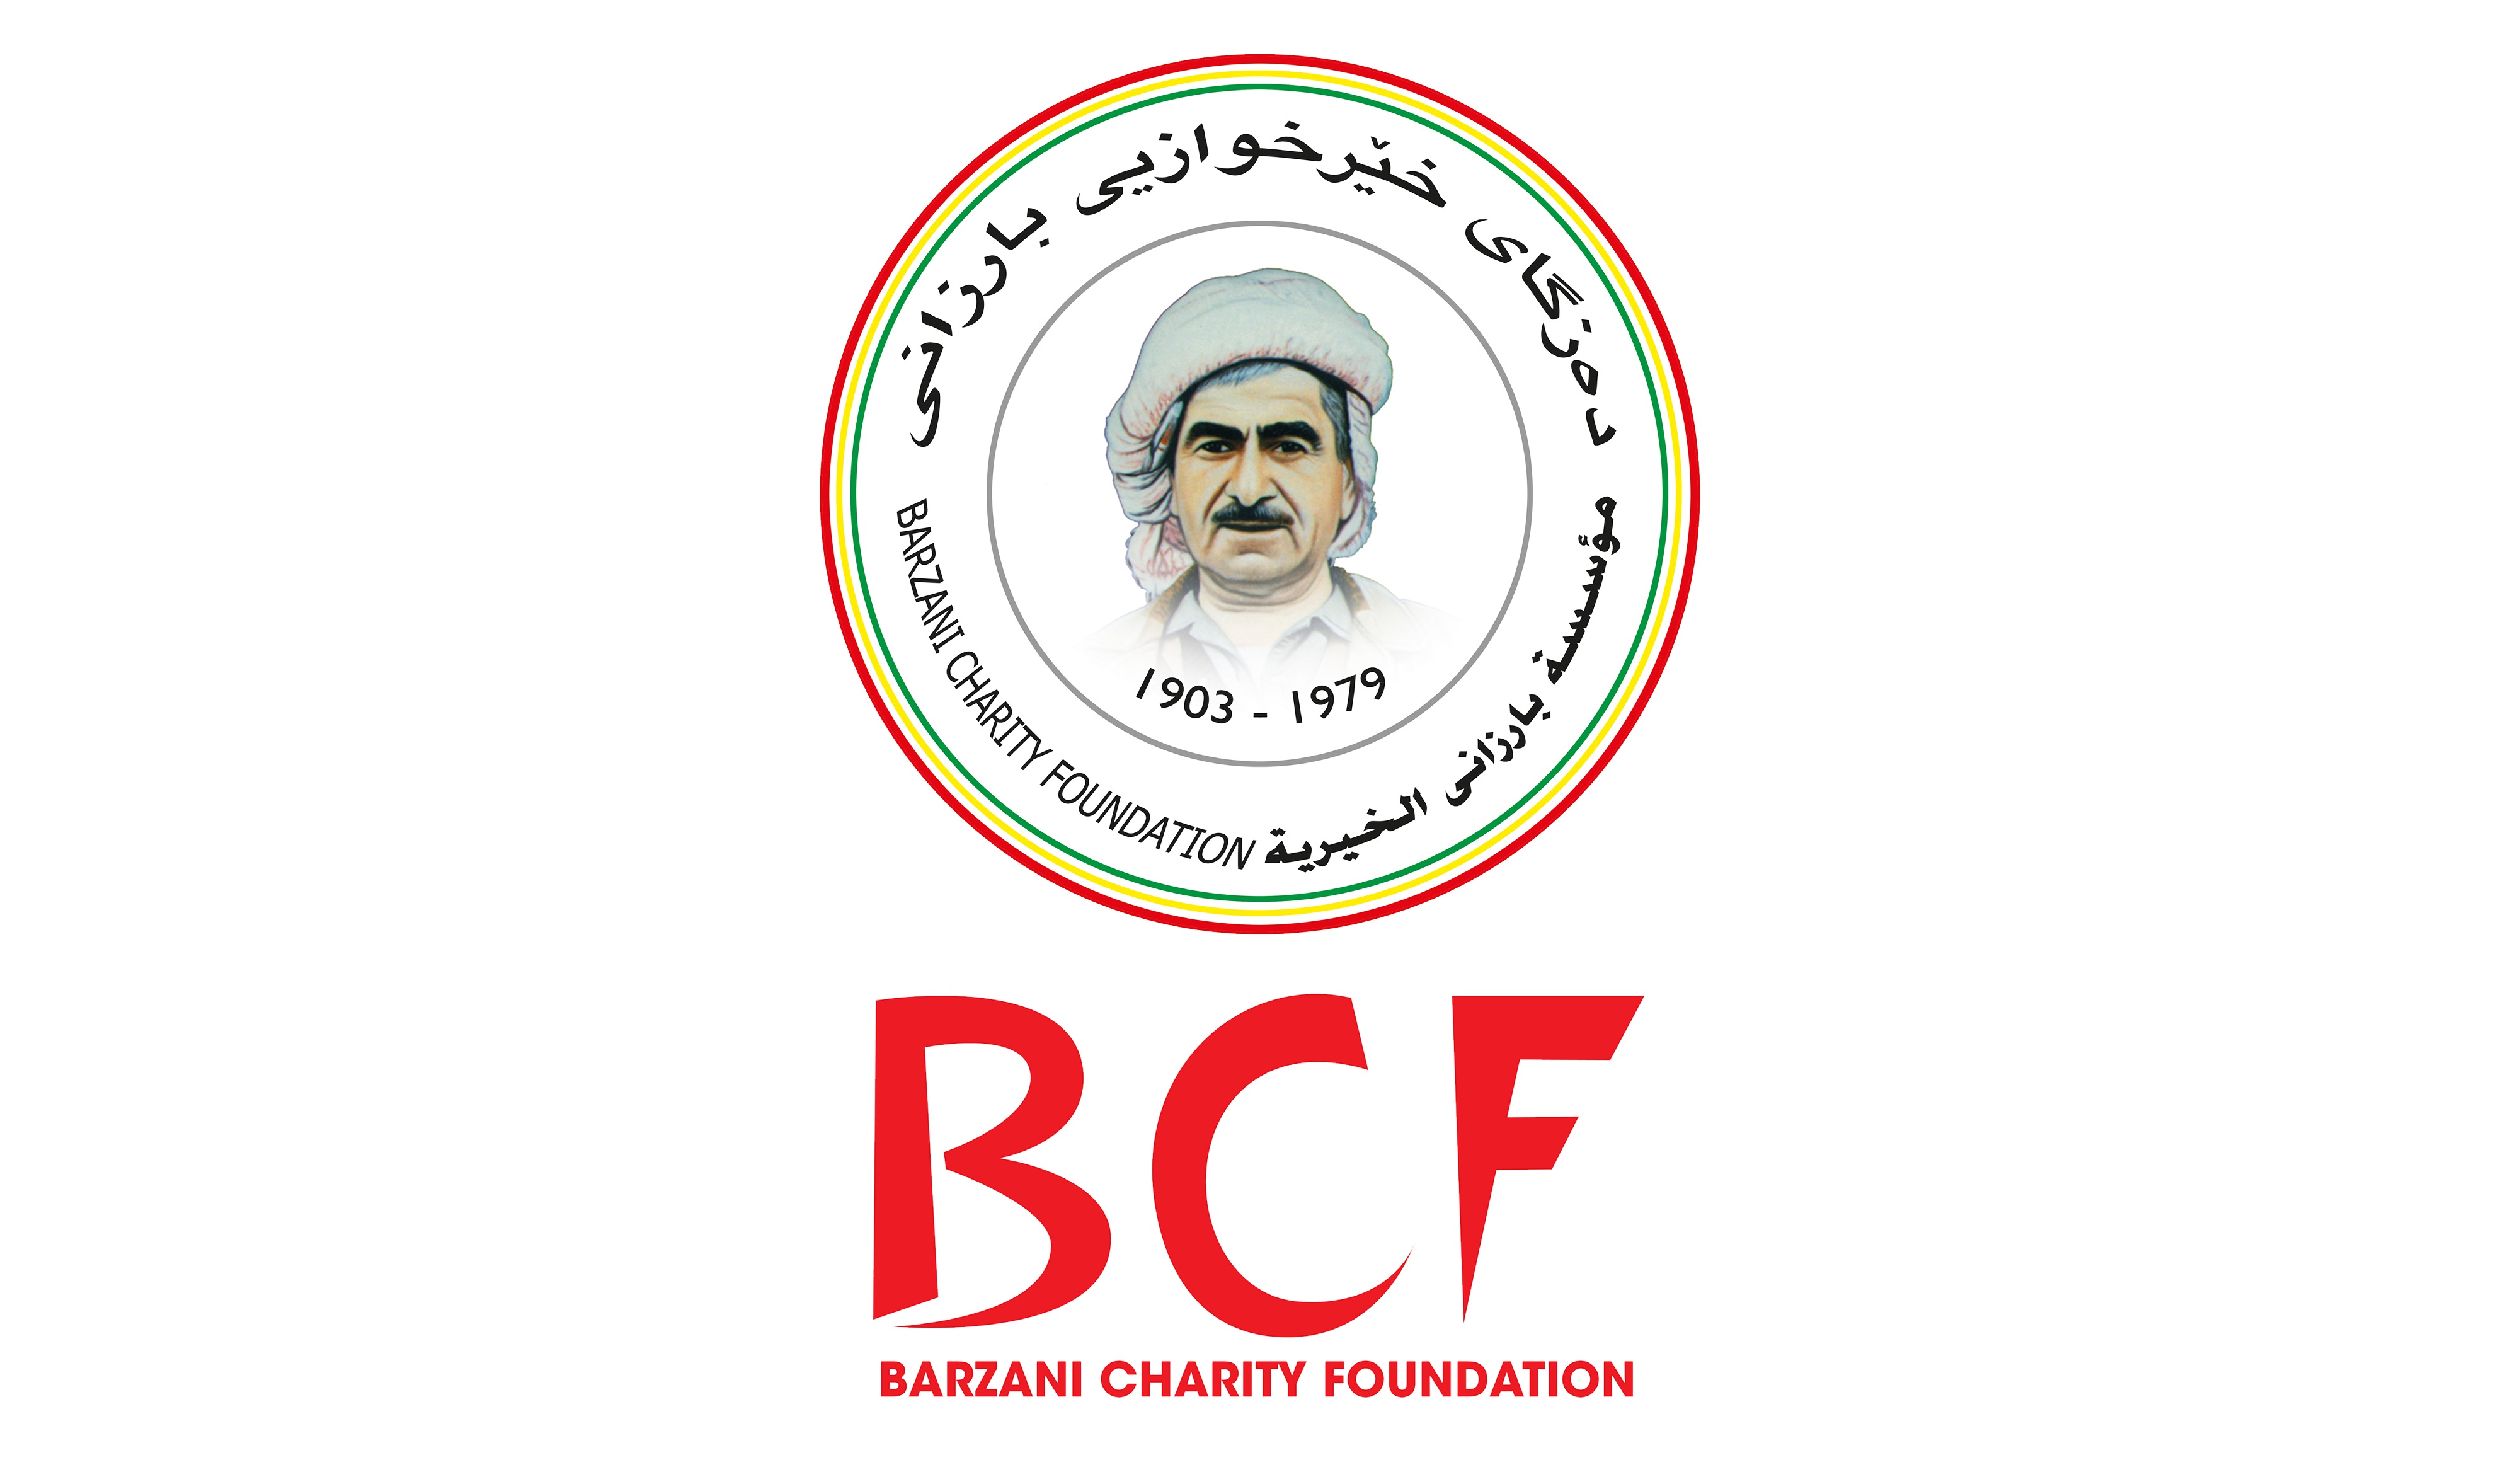 Barzani Charity sends the first convoy of relief aid for the displaced people in Kurdistan Syria